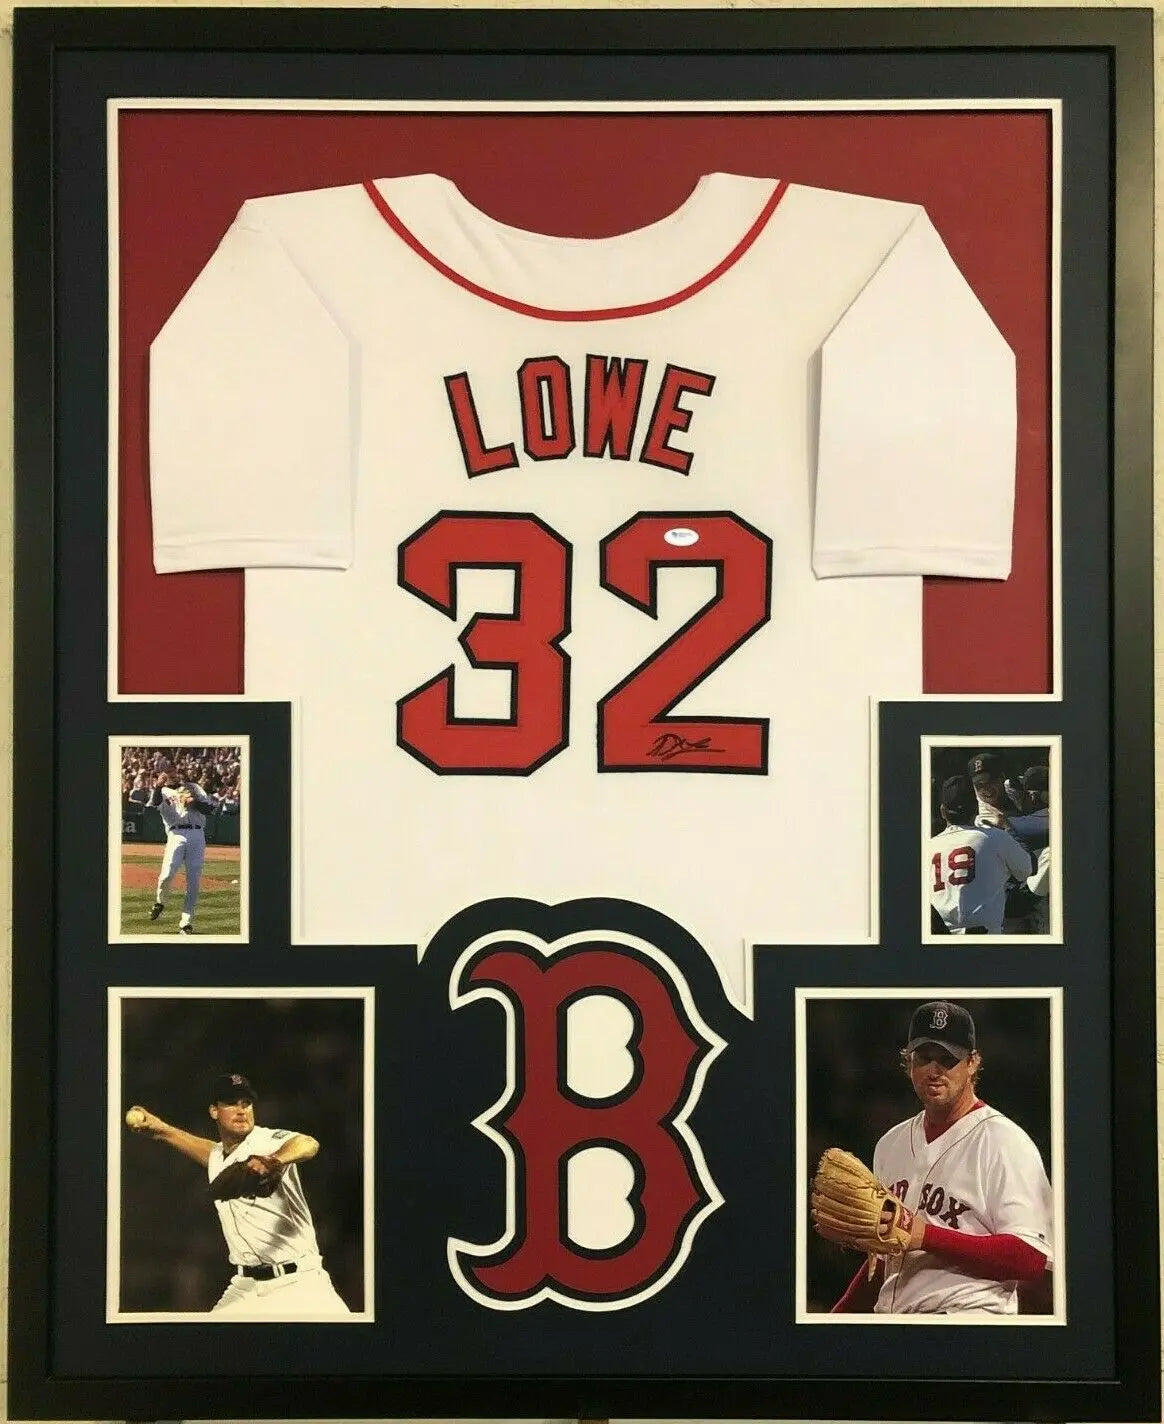 MLB Collectible Jerseys, Signed Jersey